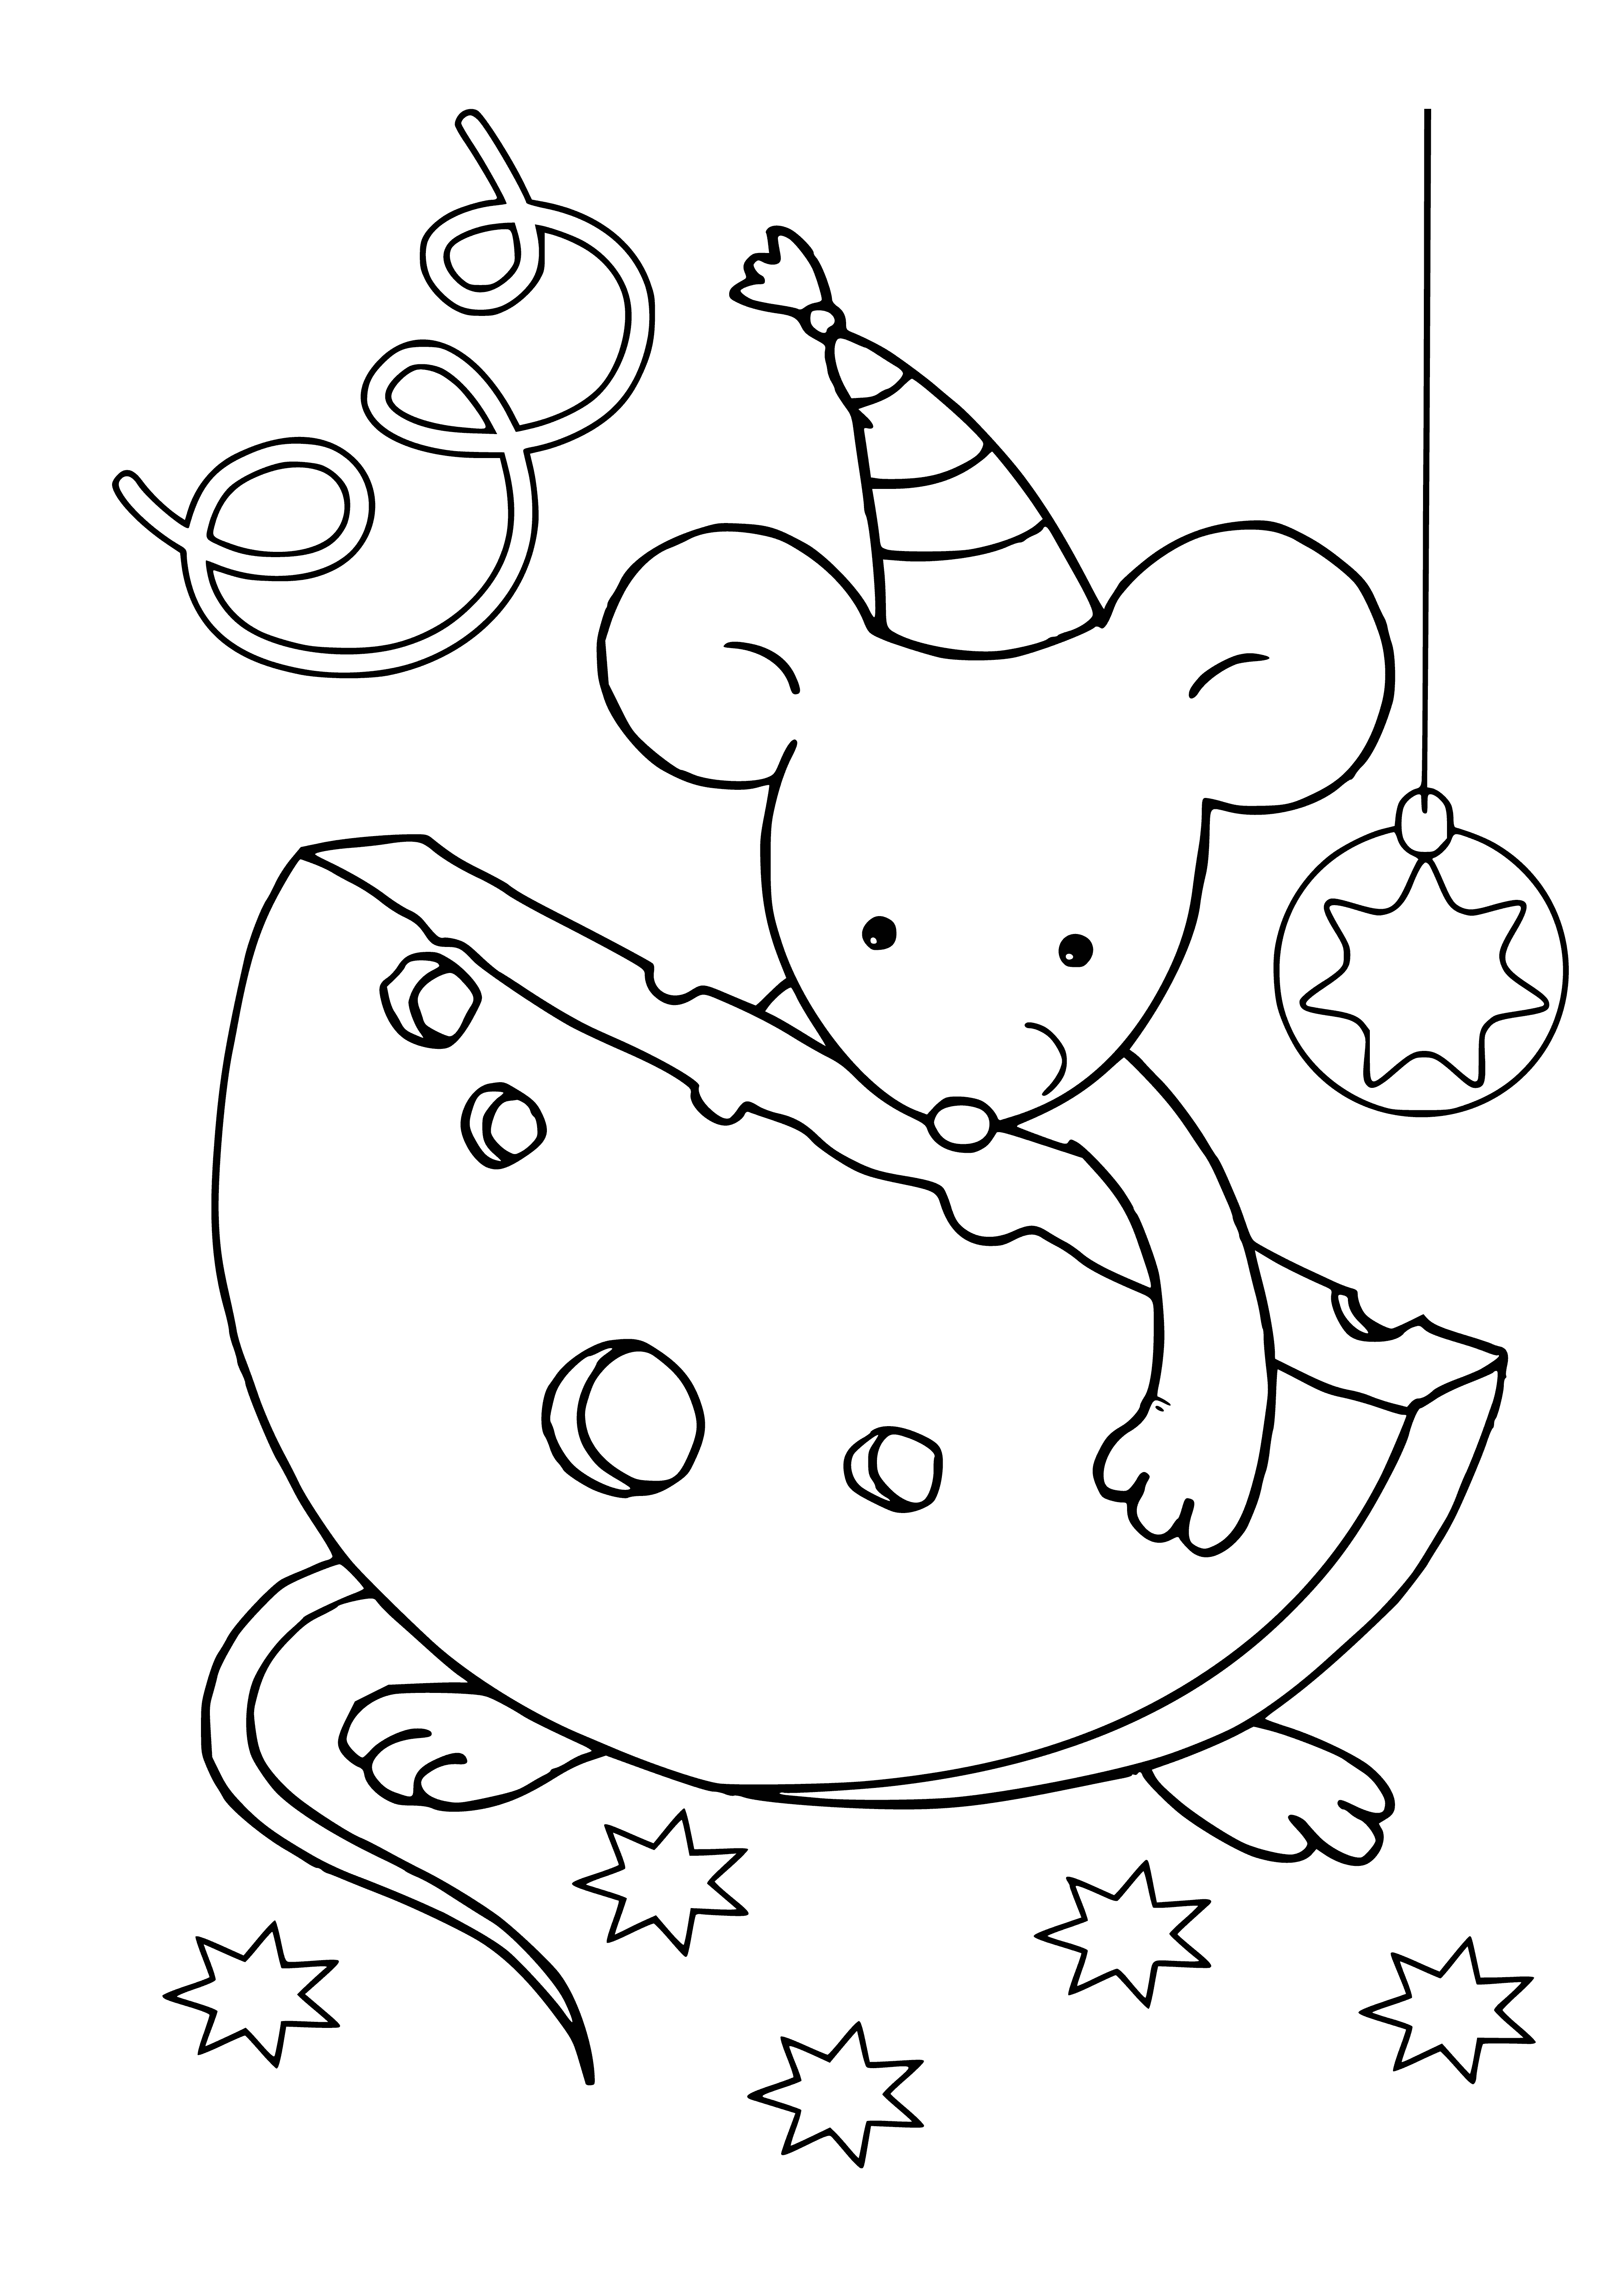 coloring page: Small brown rat sits atop red, green Christmas mouse; paw on head, looks down lovingly.